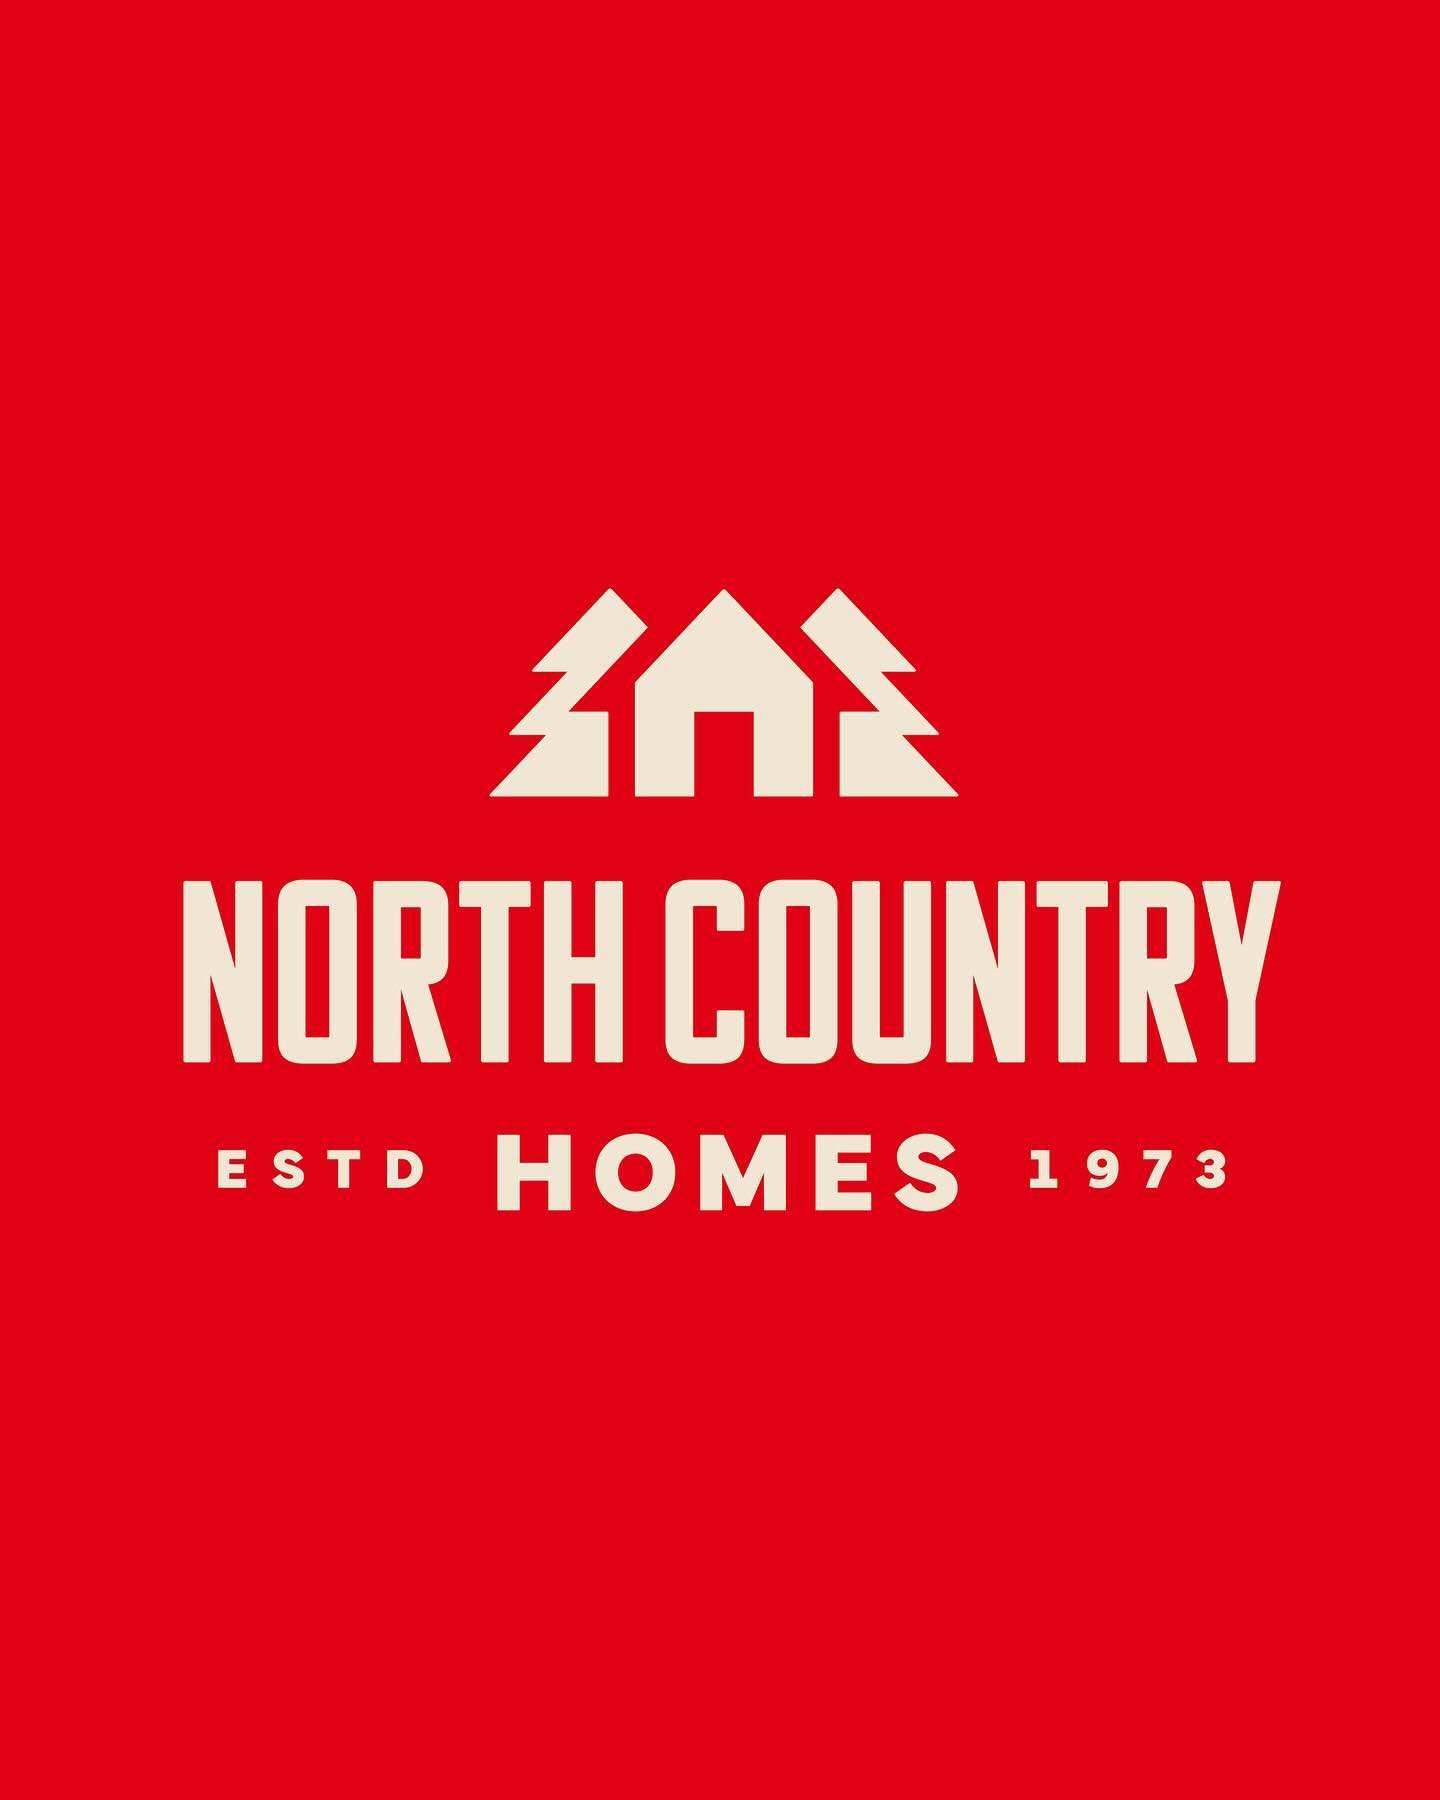 New case study on my website about my latest client, North Country Homes ✨ They are fantastic folks to work with and I&rsquo;m looking forward to what the future brings for them. 

#northcountryhomes #rebrand #graphicdesign #casestudy #housingindustr